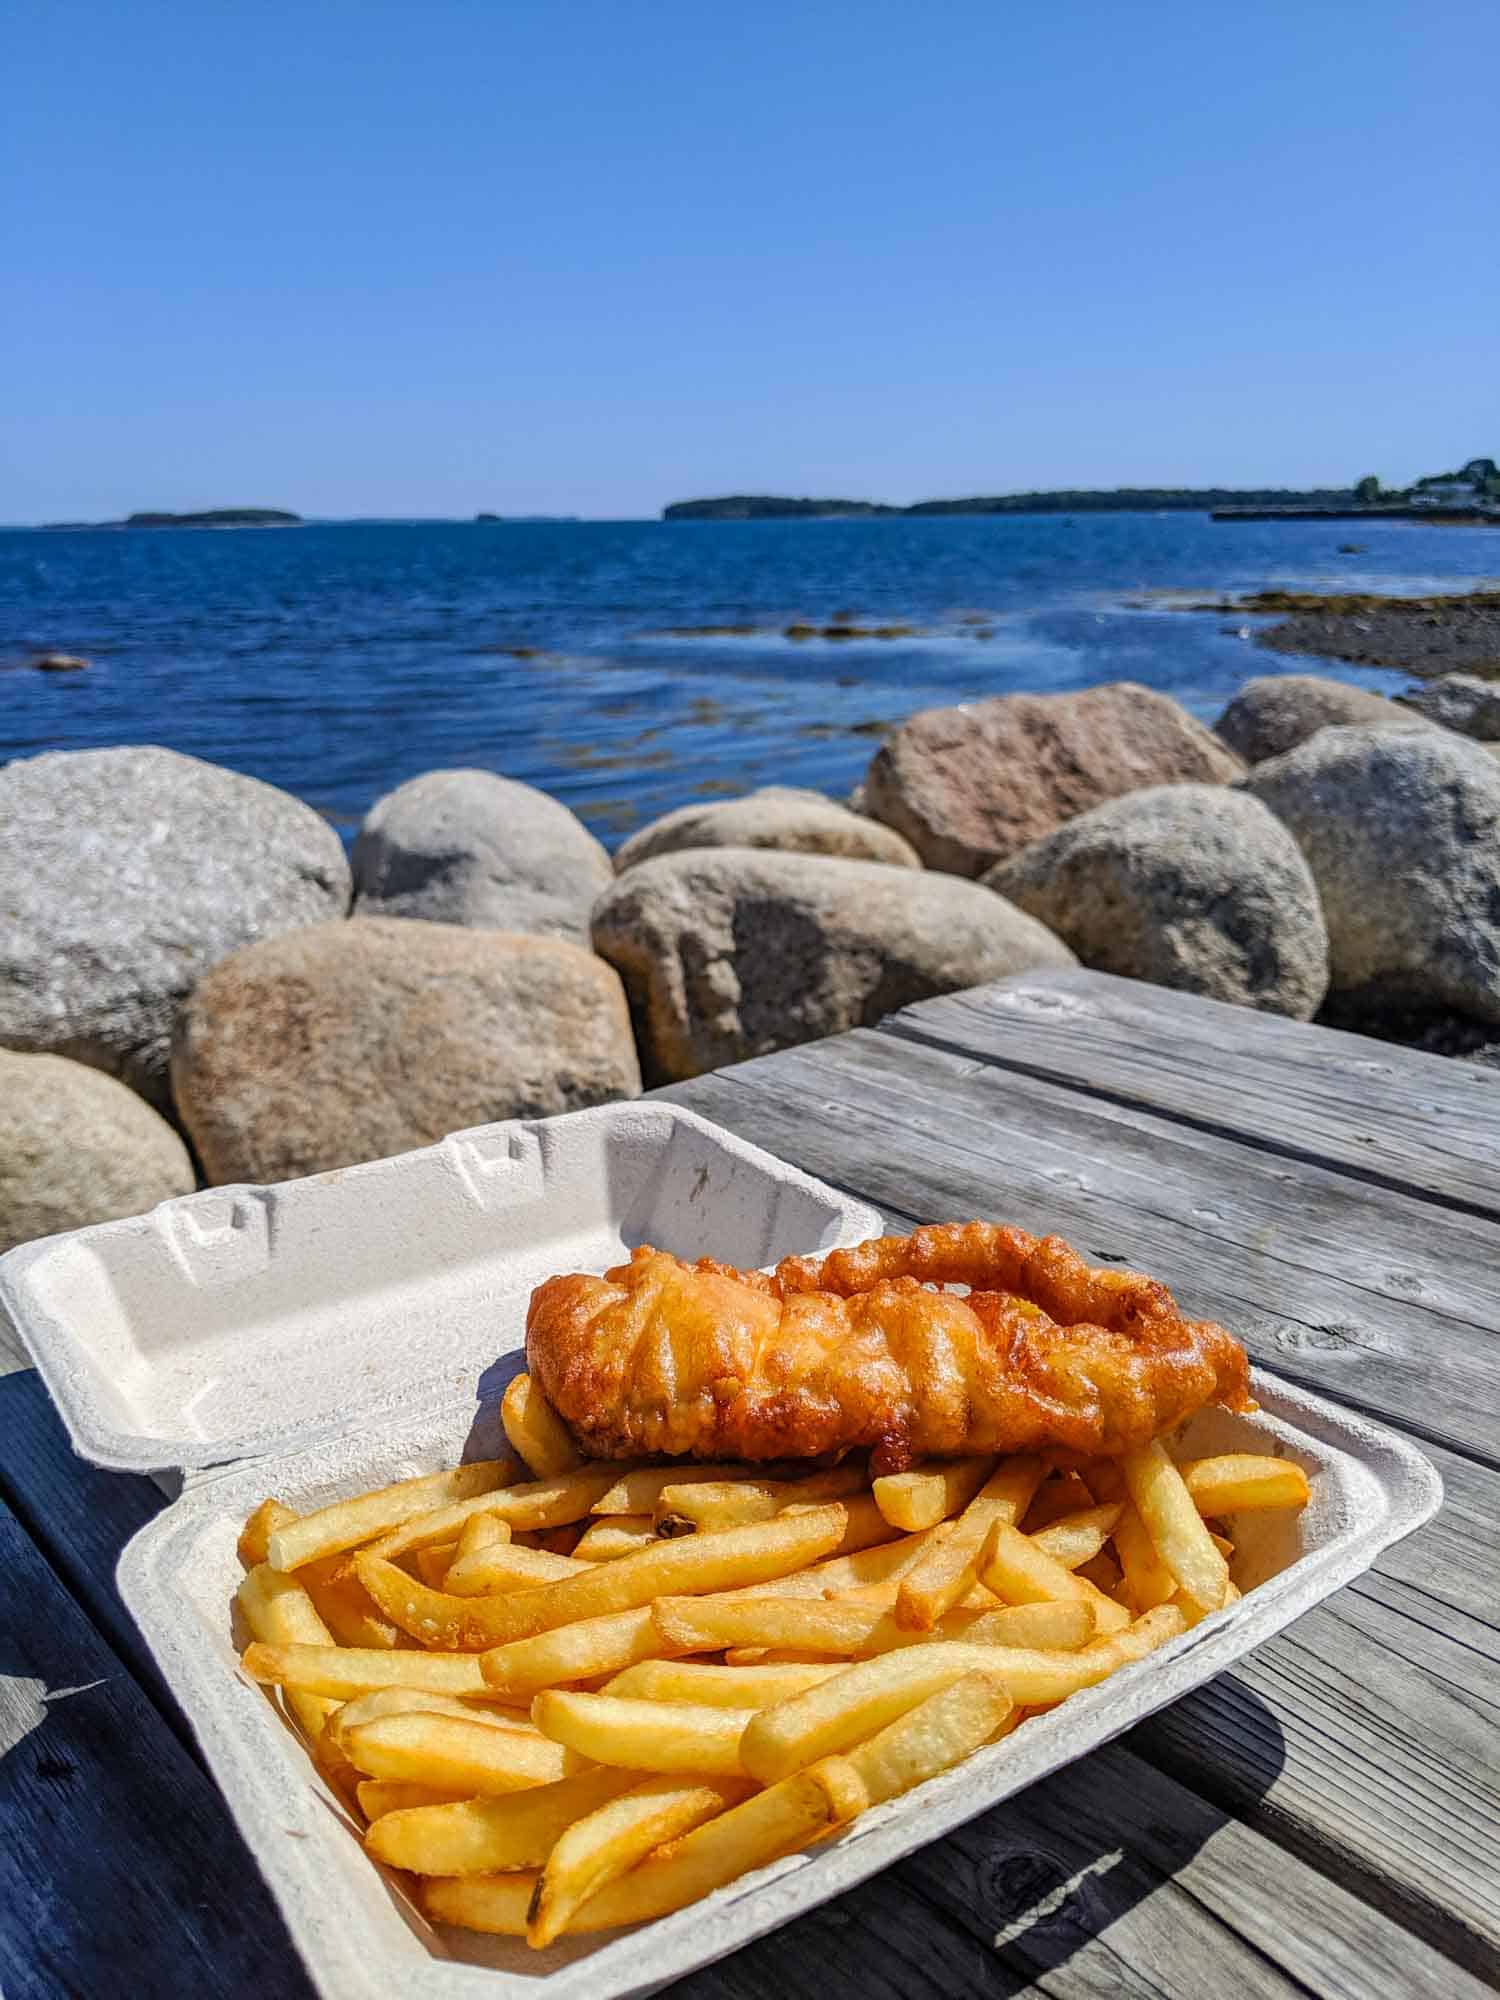 Classic Nova Scotia food, fish and chips on a grey picnic table with view of the ocean